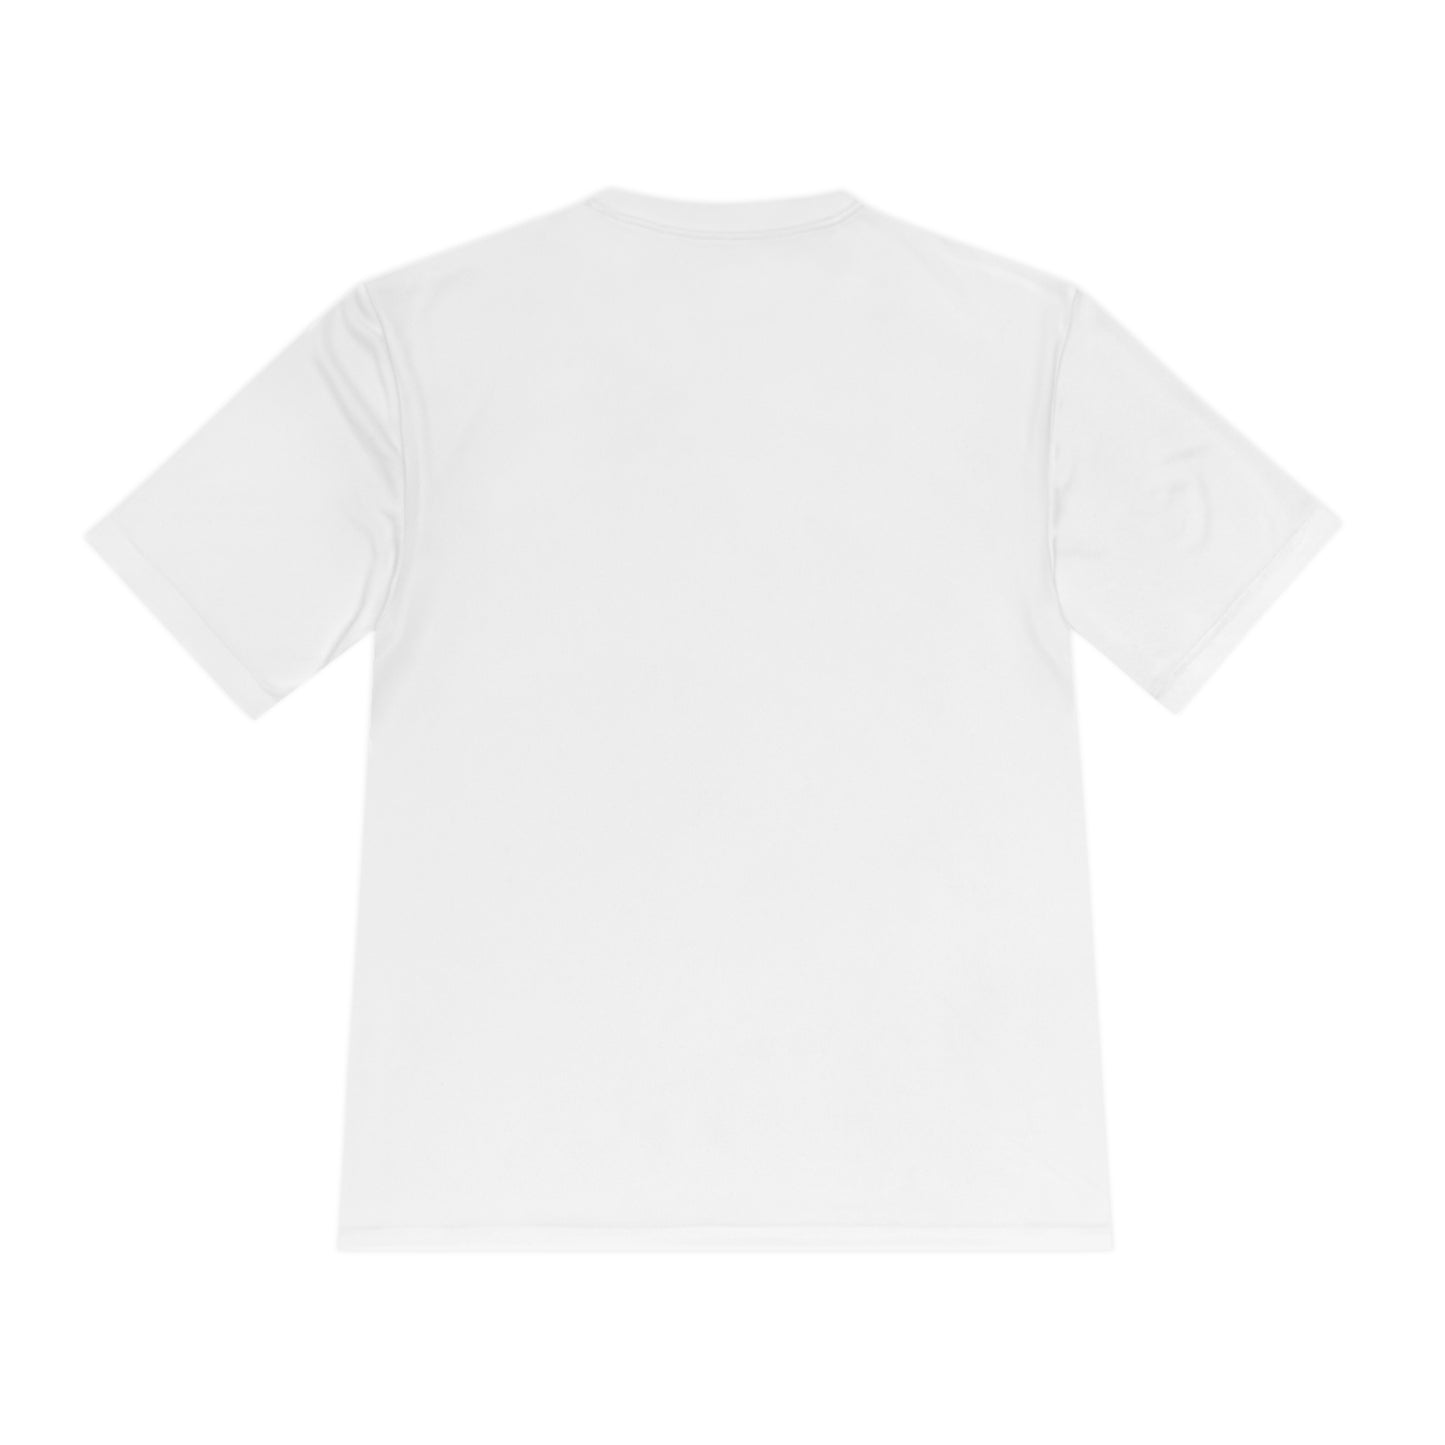 Performance T-Shirt - The Release